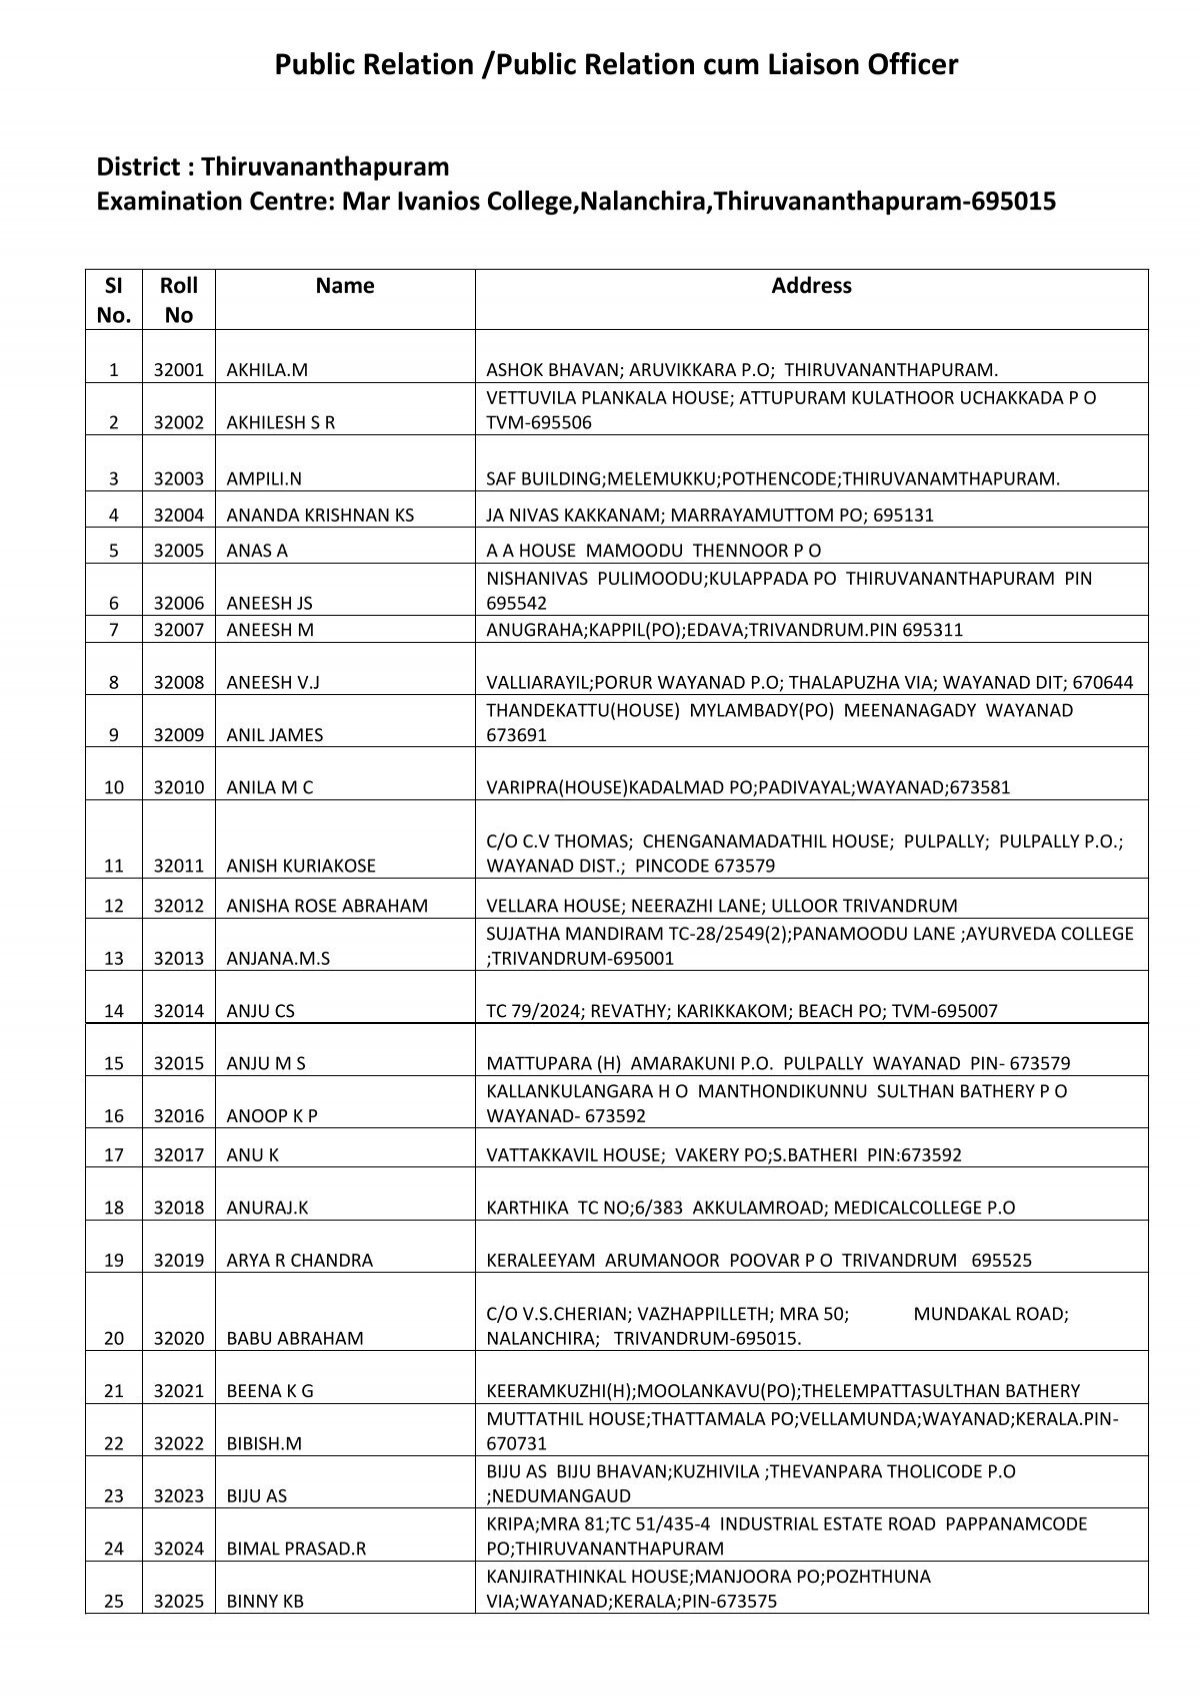 List of Shortlisted Candidates for Written Test